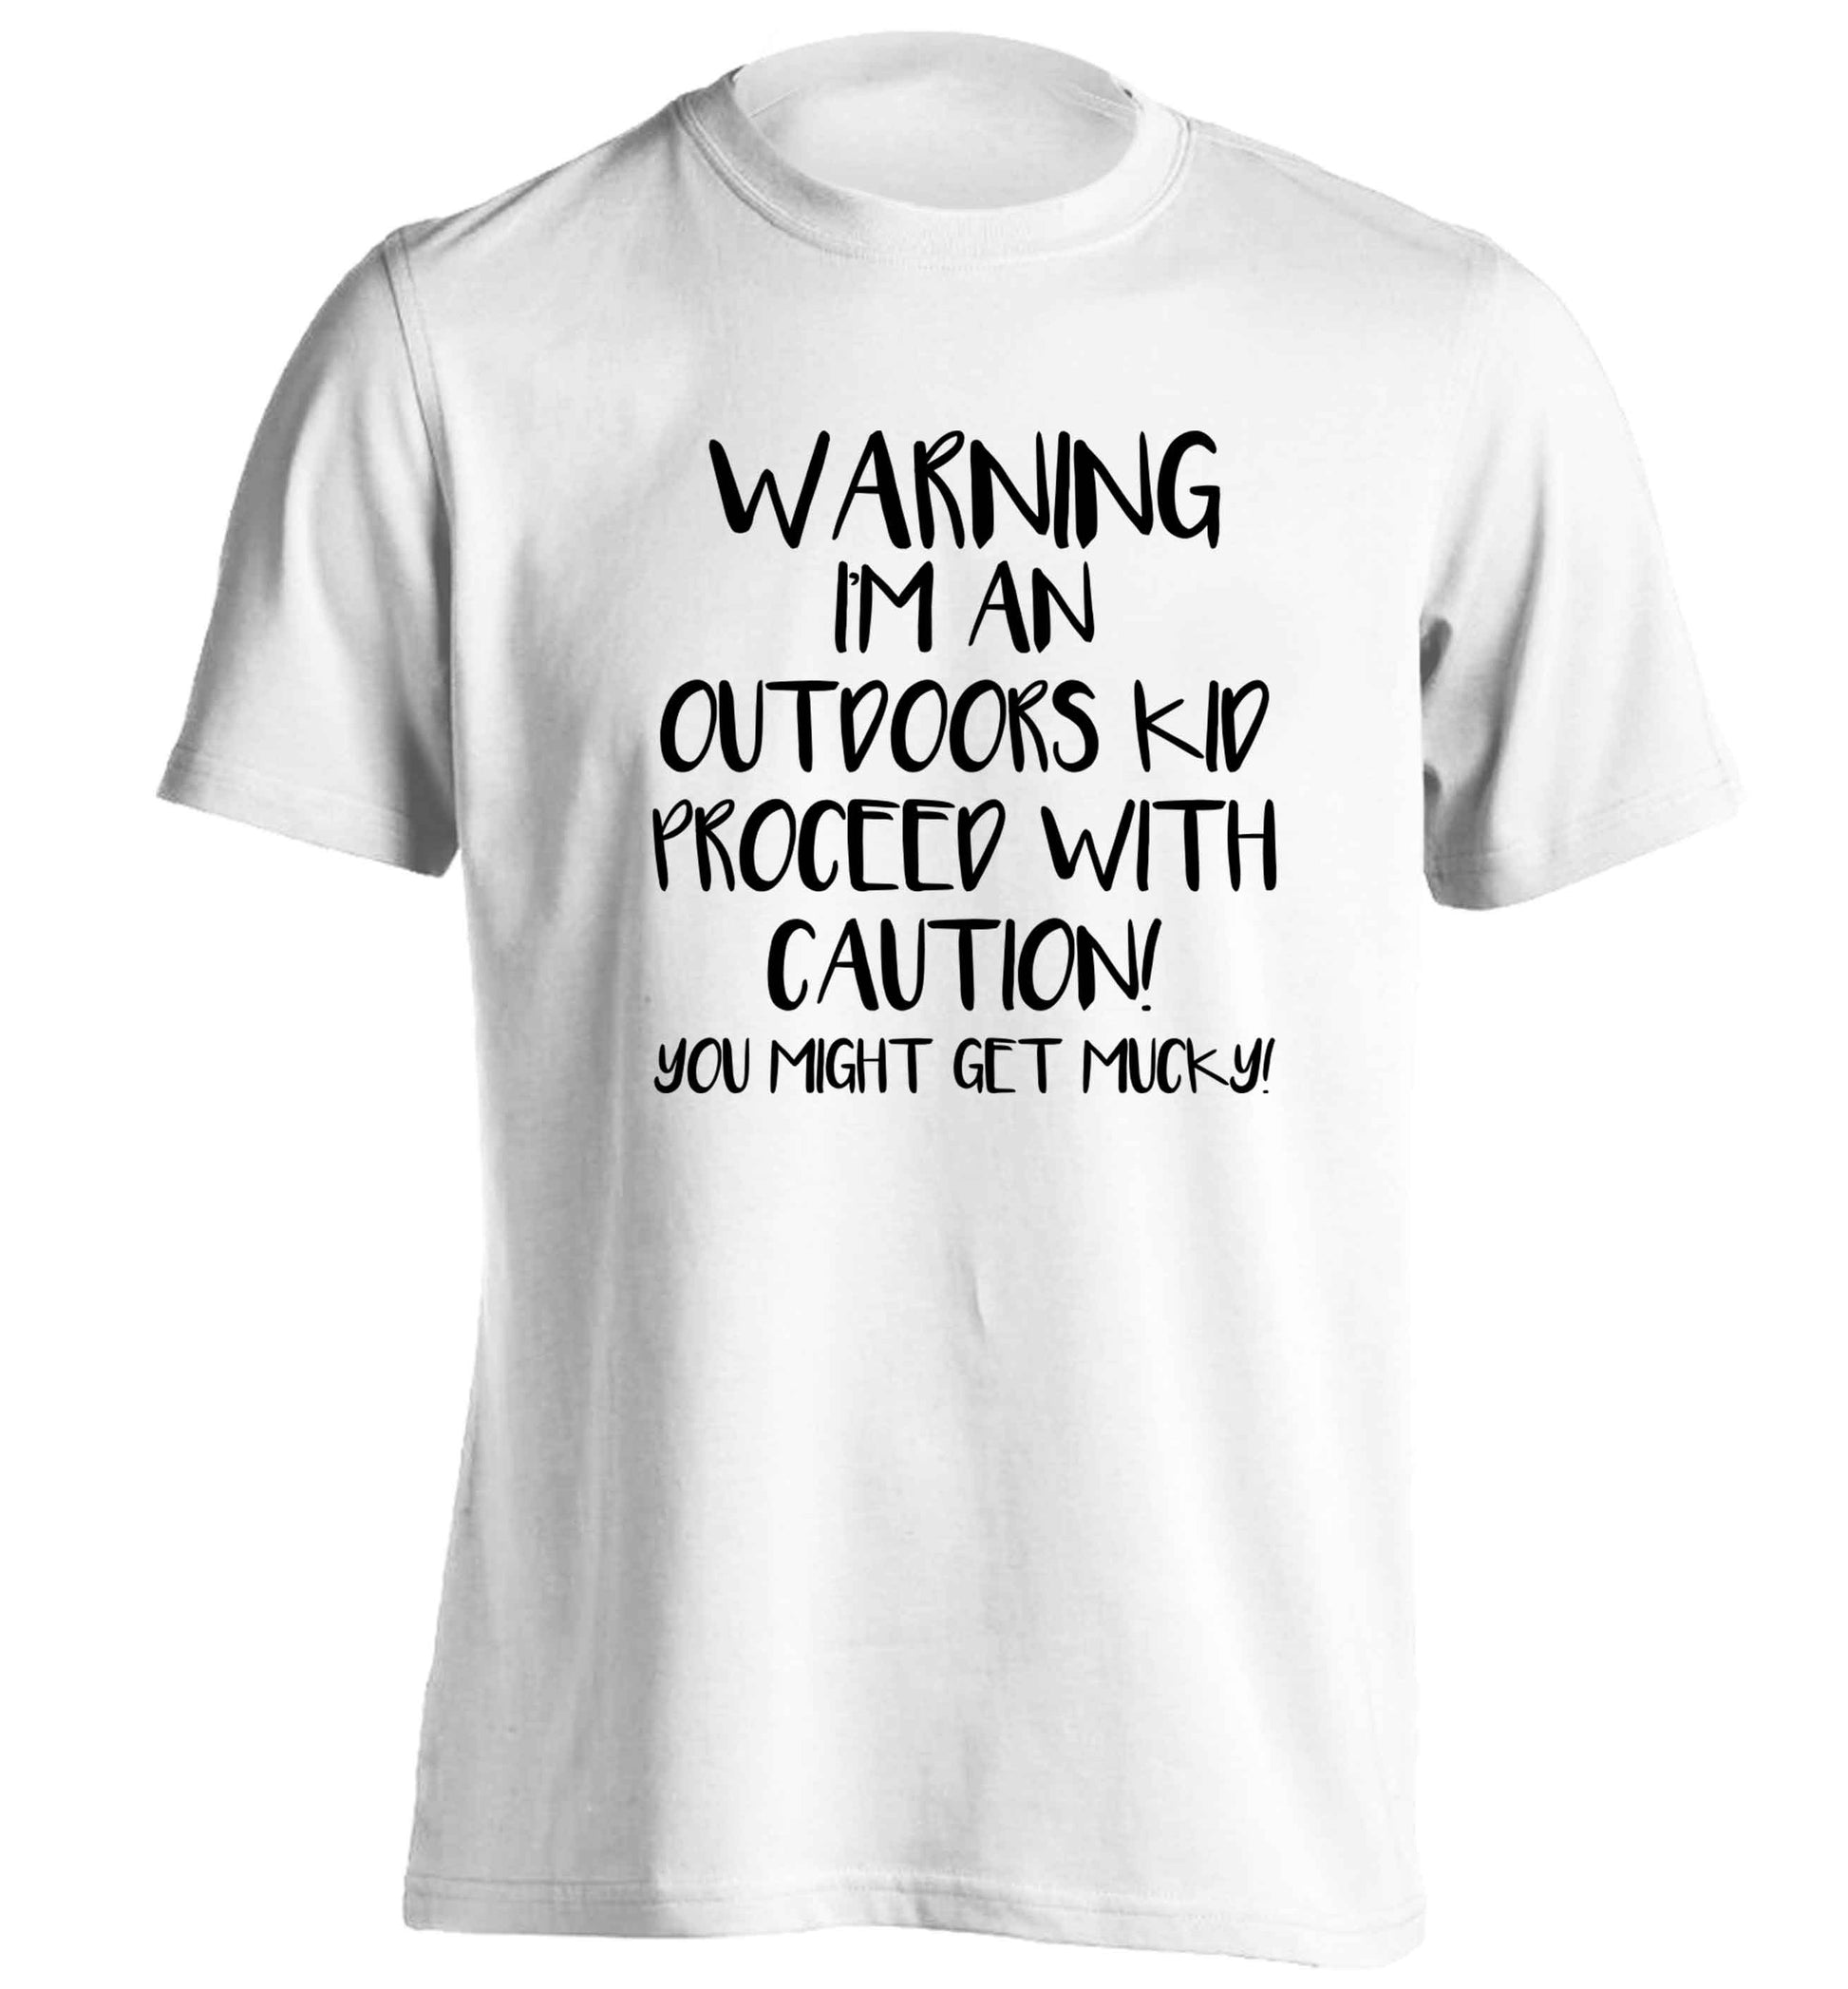 Warning I'm an outdoors kid! Proceed with caution you might get mucky adults unisex white Tshirt 2XL